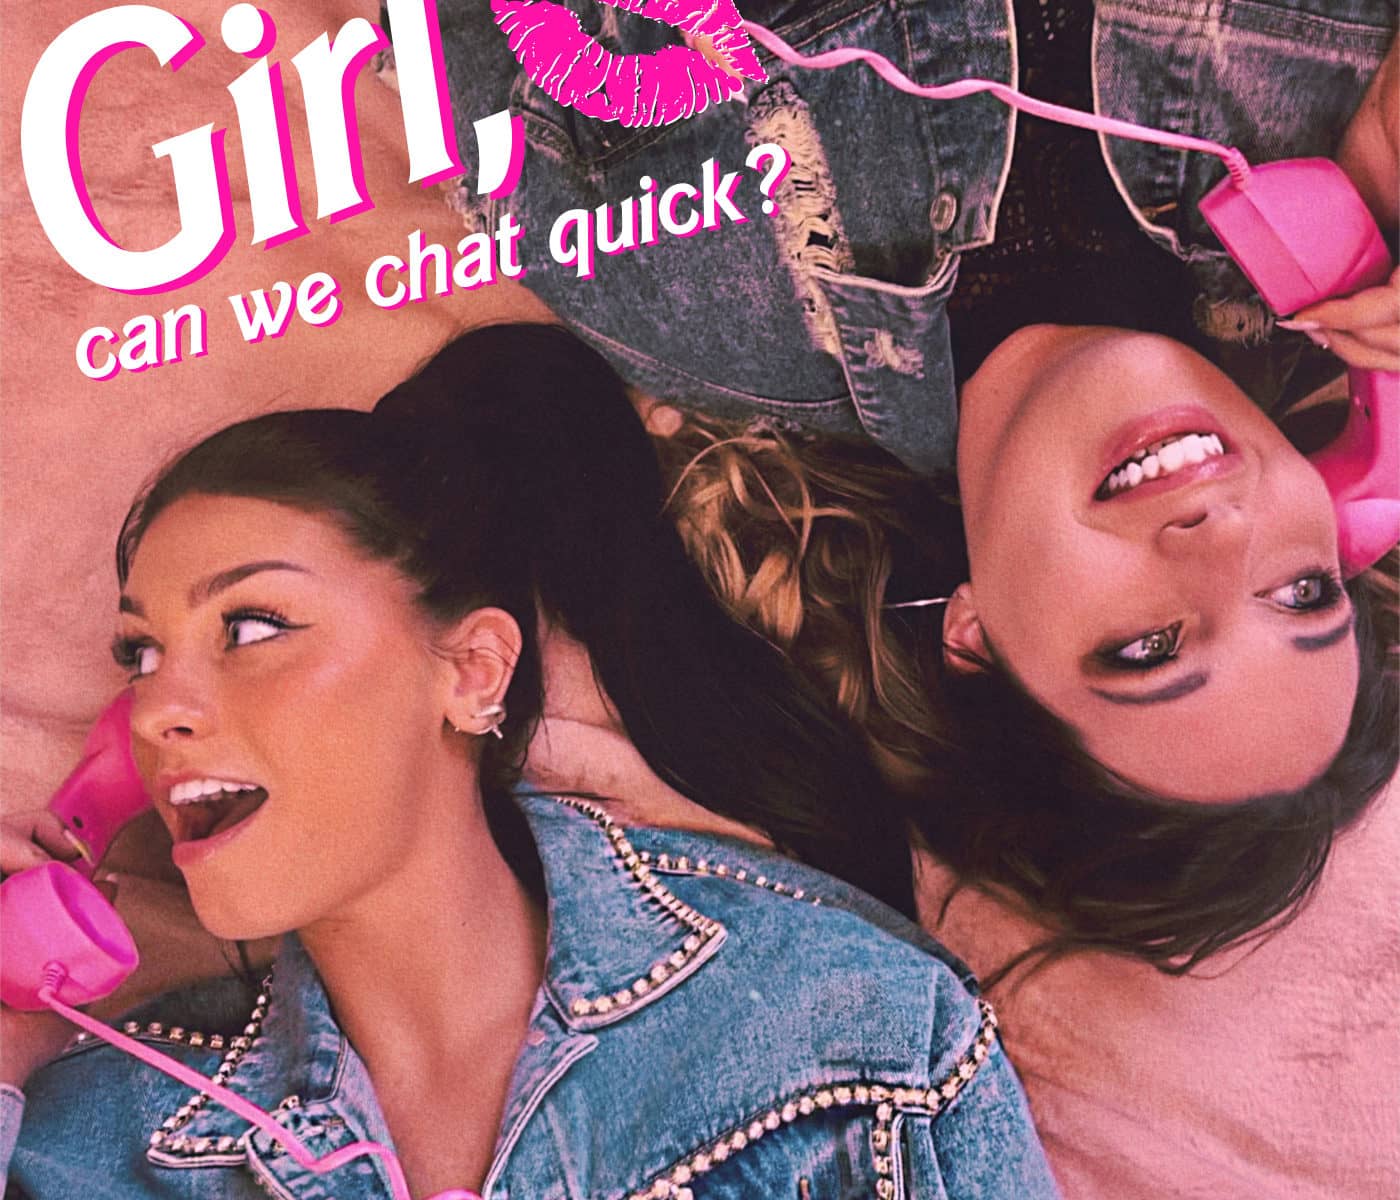 girl_can_we_chat_quick_podcast-17